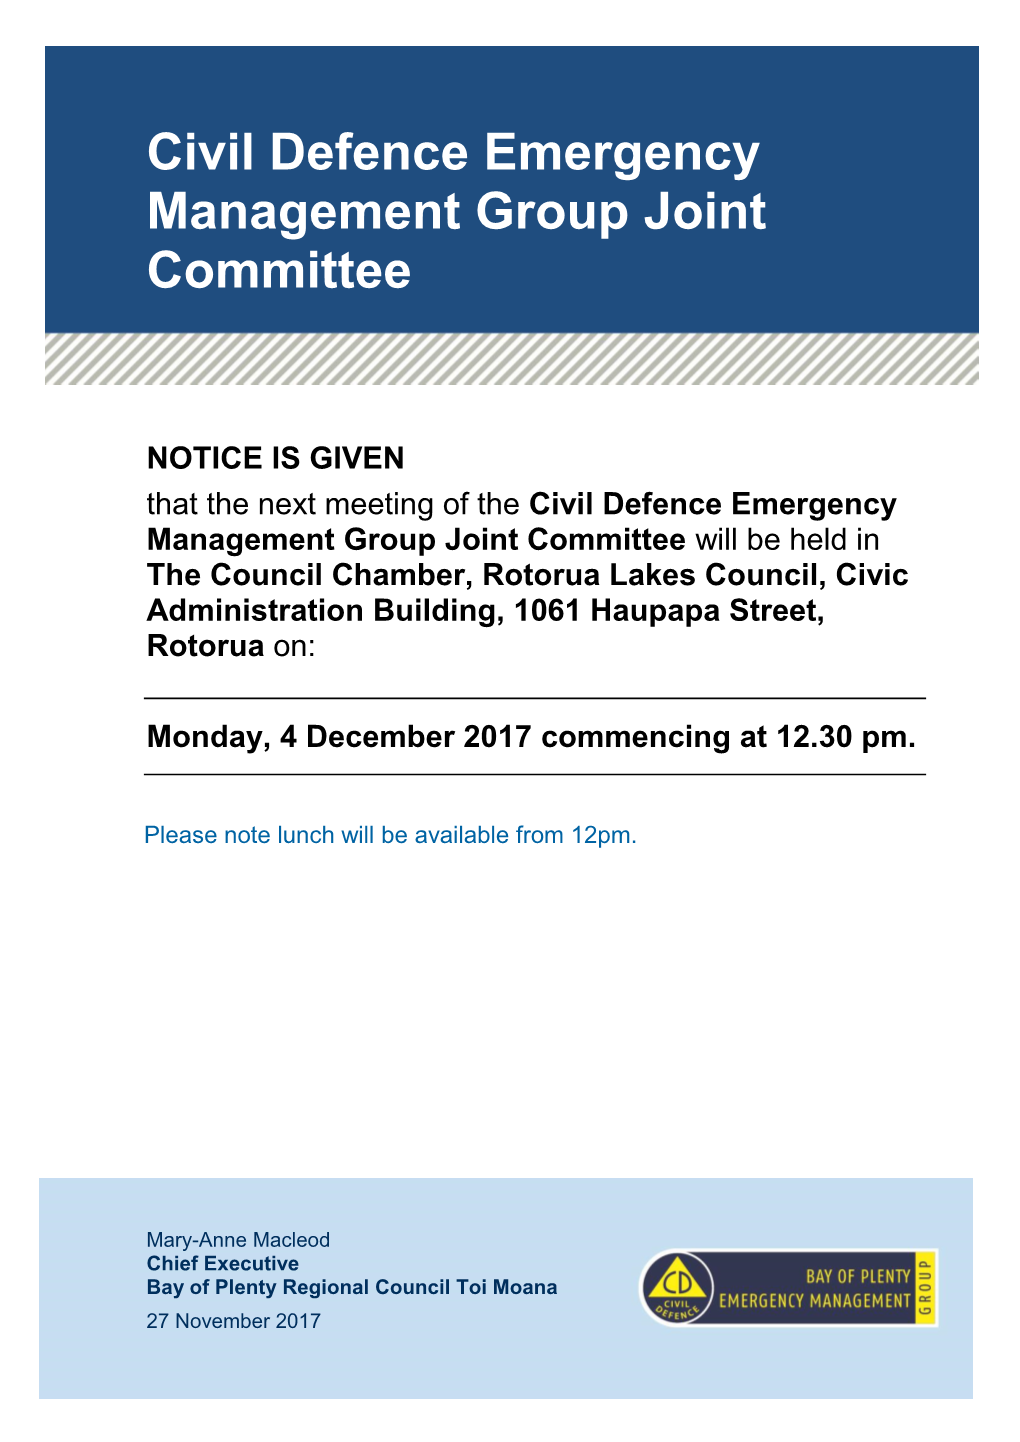 Civil Defence Emergency Management Group Joint Committee